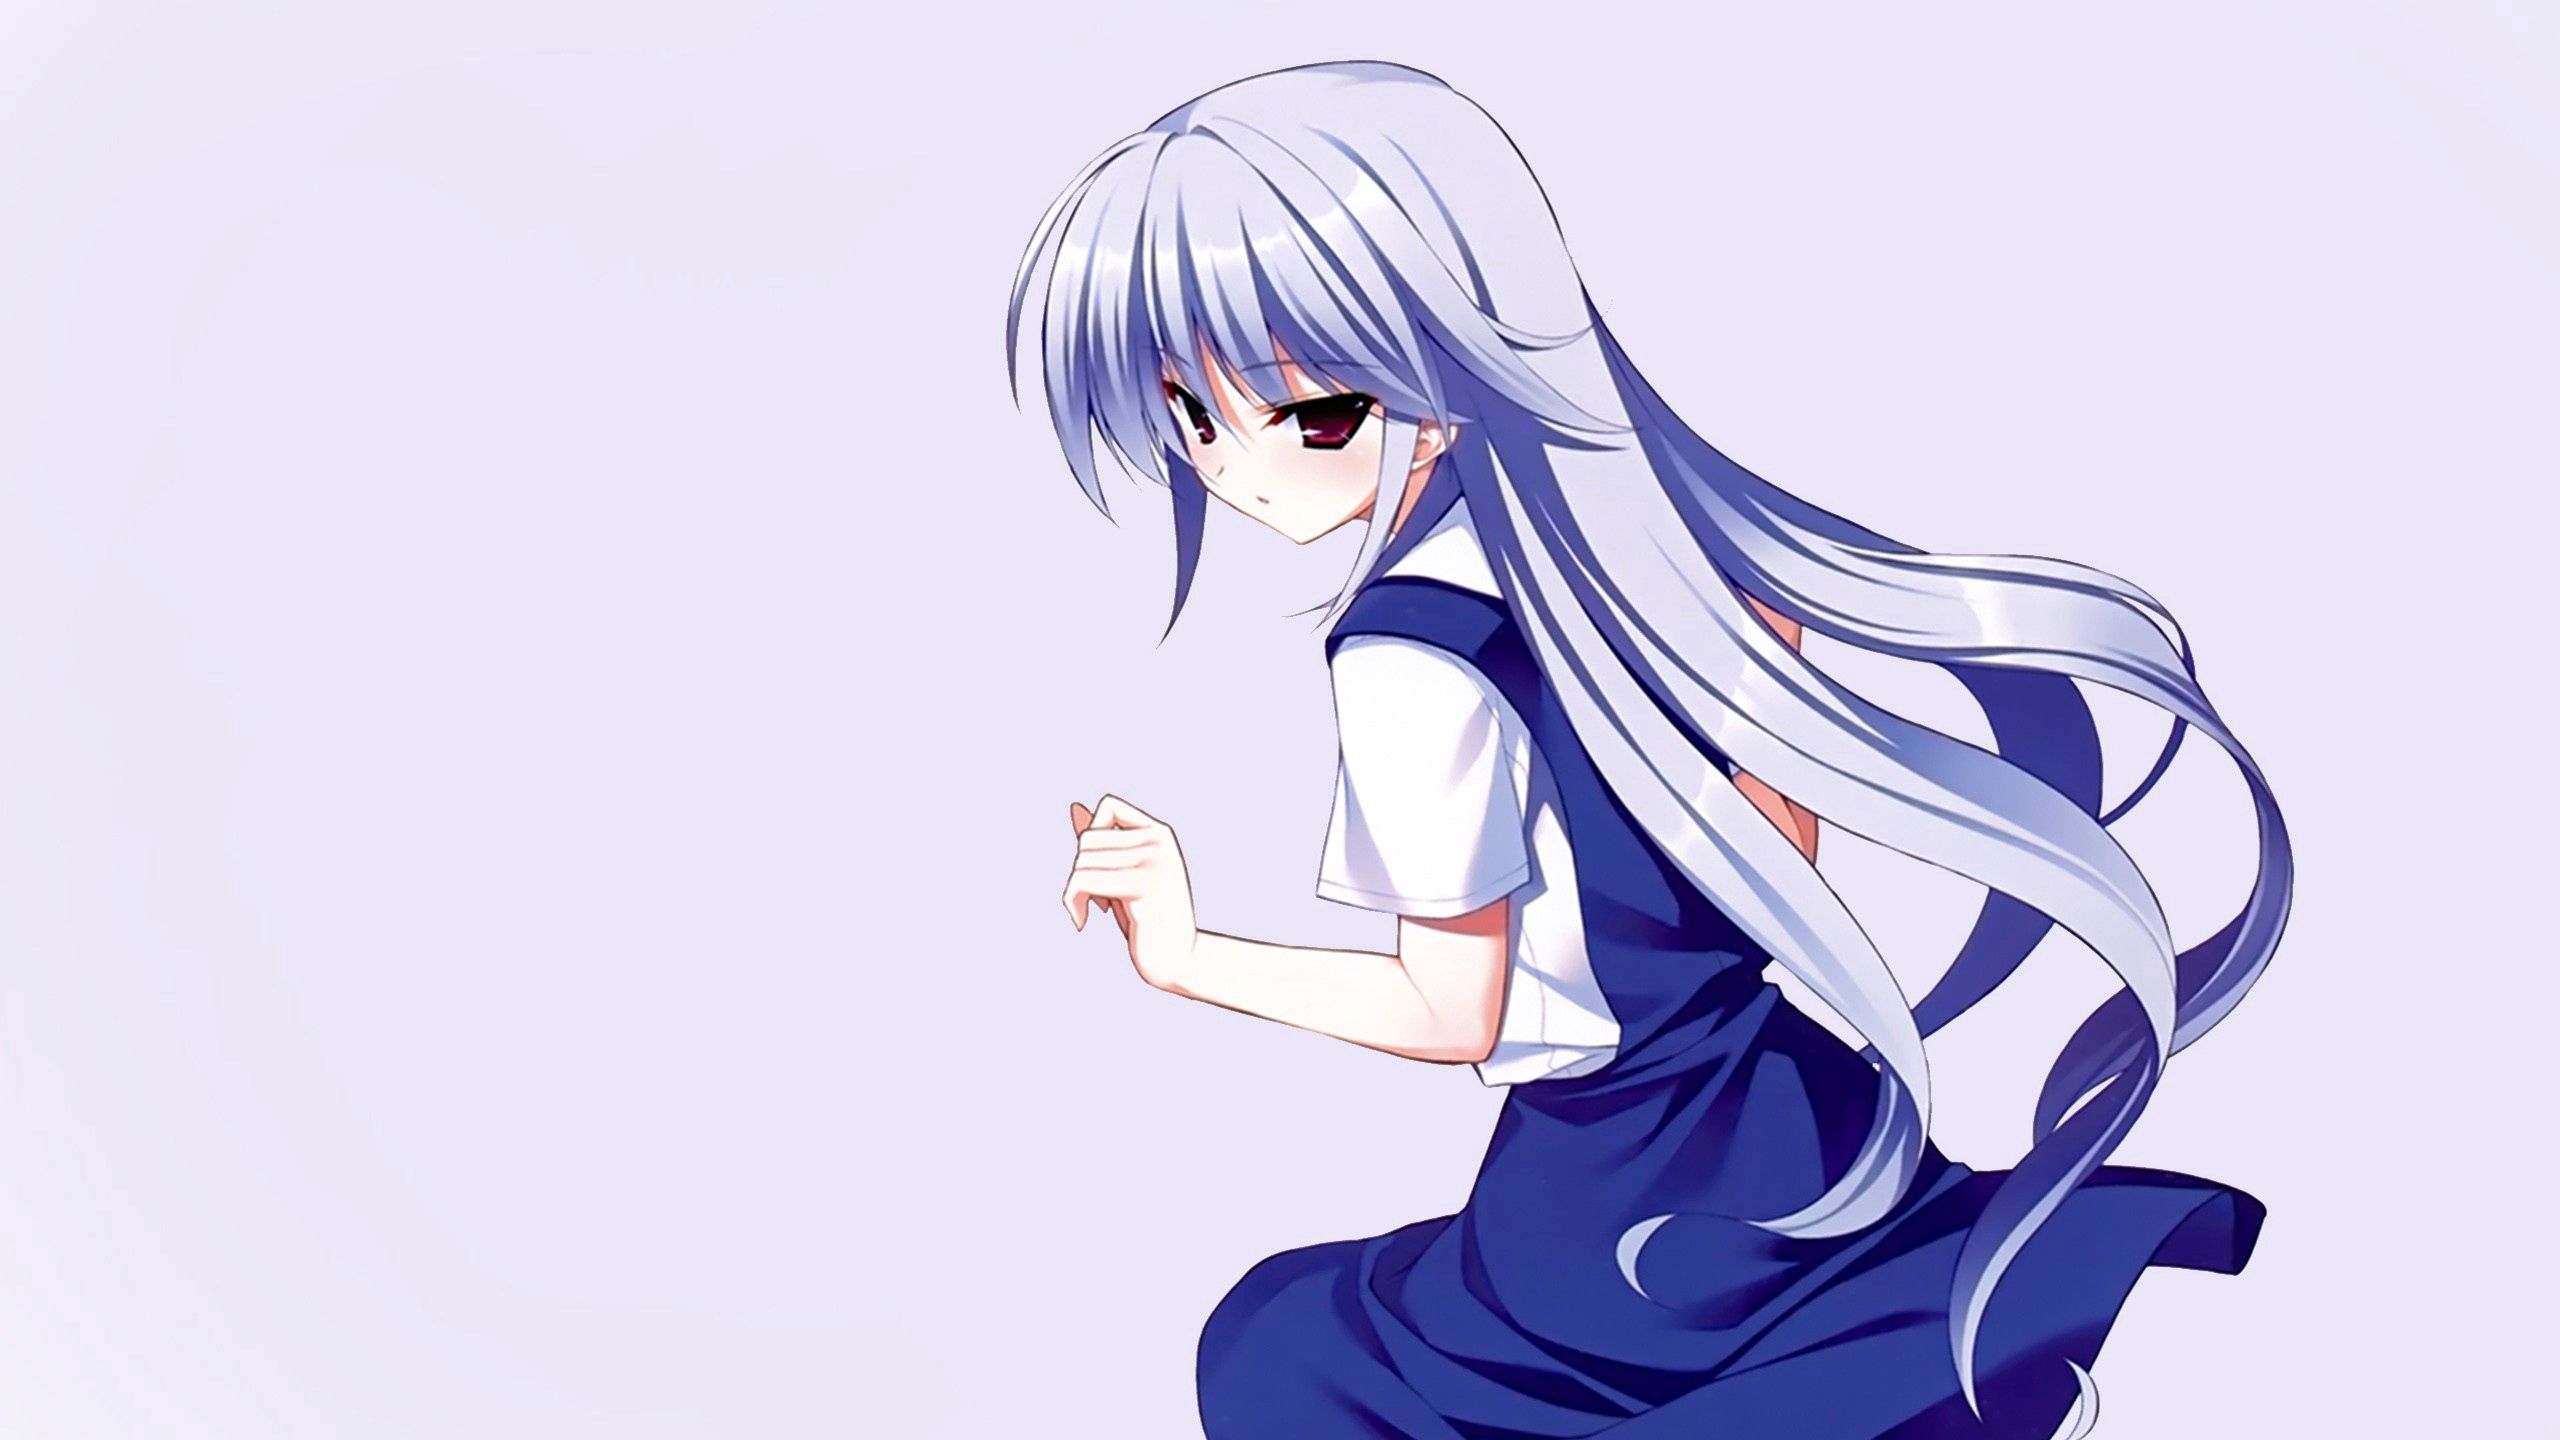 93020 download wallpaper anime, sit, girl, hair, long haired, long-haired screensavers and pictures for free